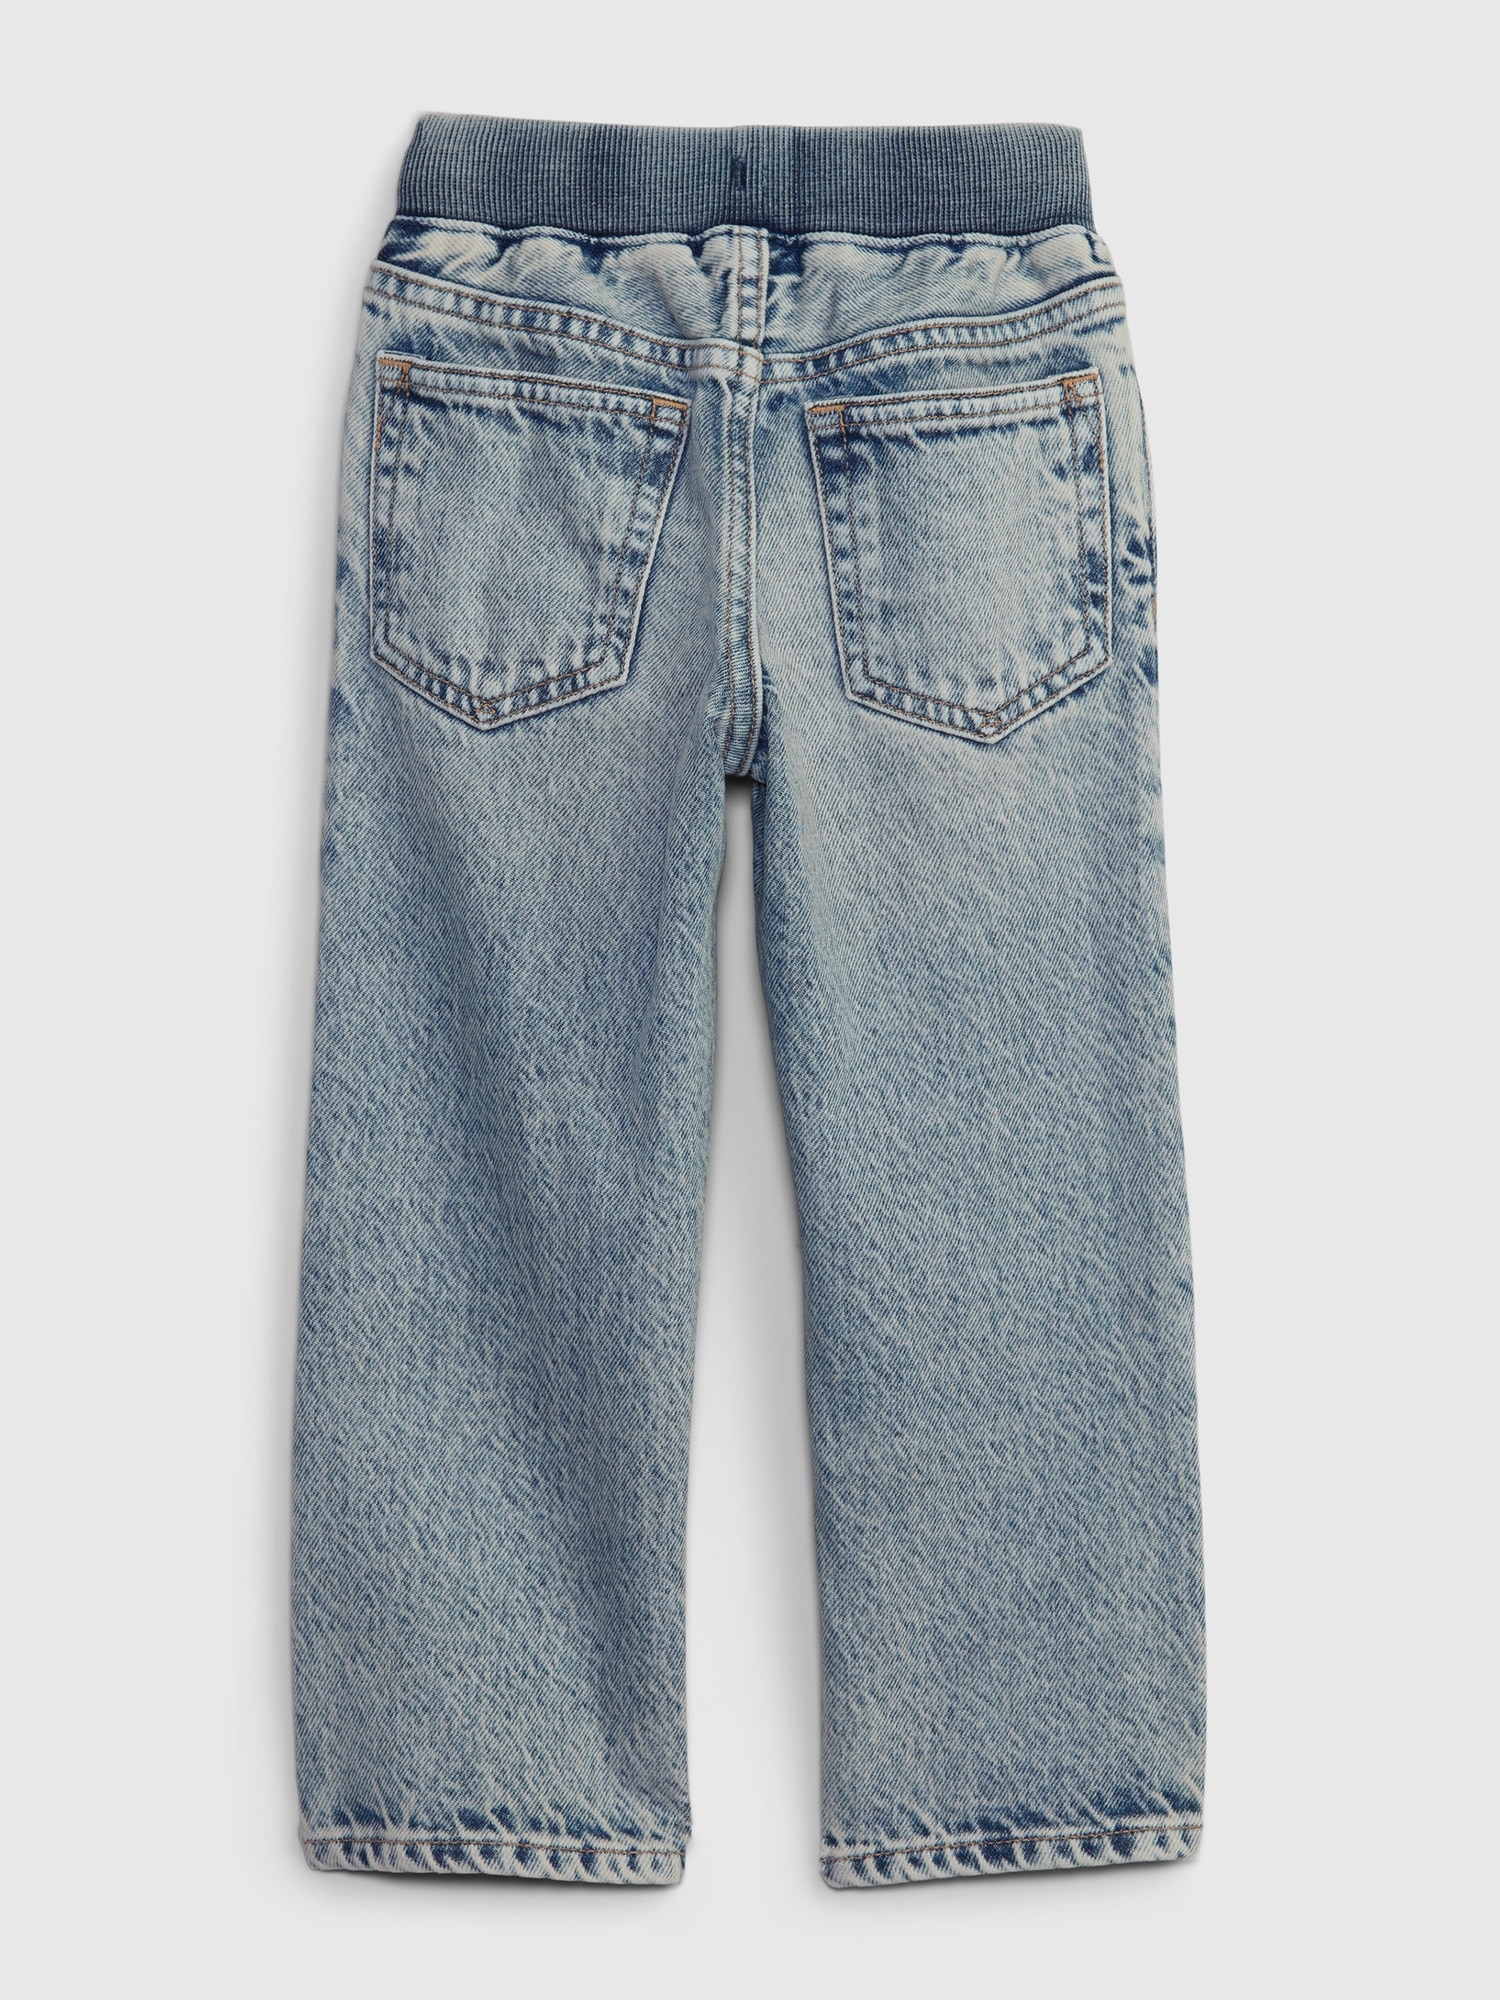 Gap Kids Toddler Skinny Jeans with Washwell Light Wash